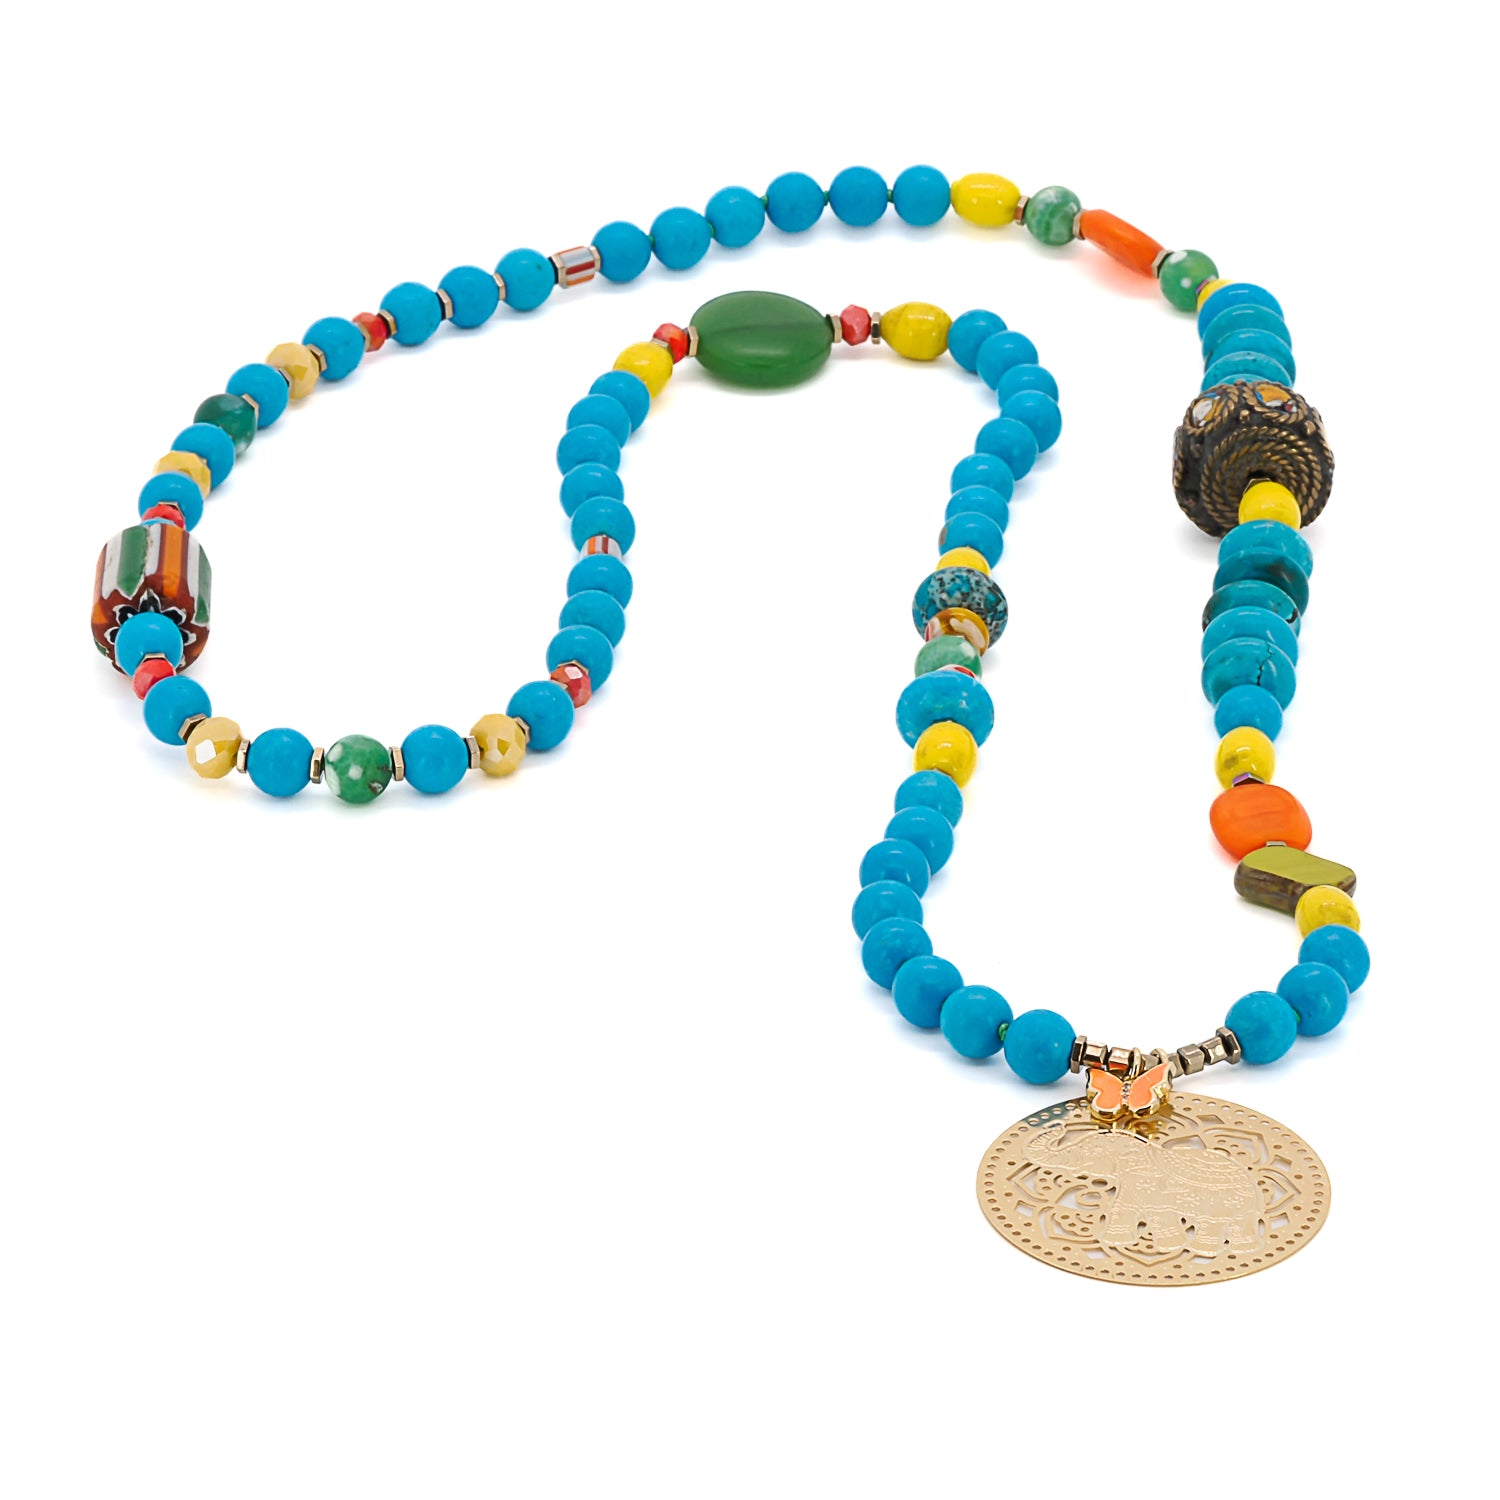 Handcrafted with care, the Colorful Therapy Elephant Turquoise Necklace features natural turquoise beads, African beads, and sparkling crystals, all accentuated by an 18K gold plated elephant pendant. 